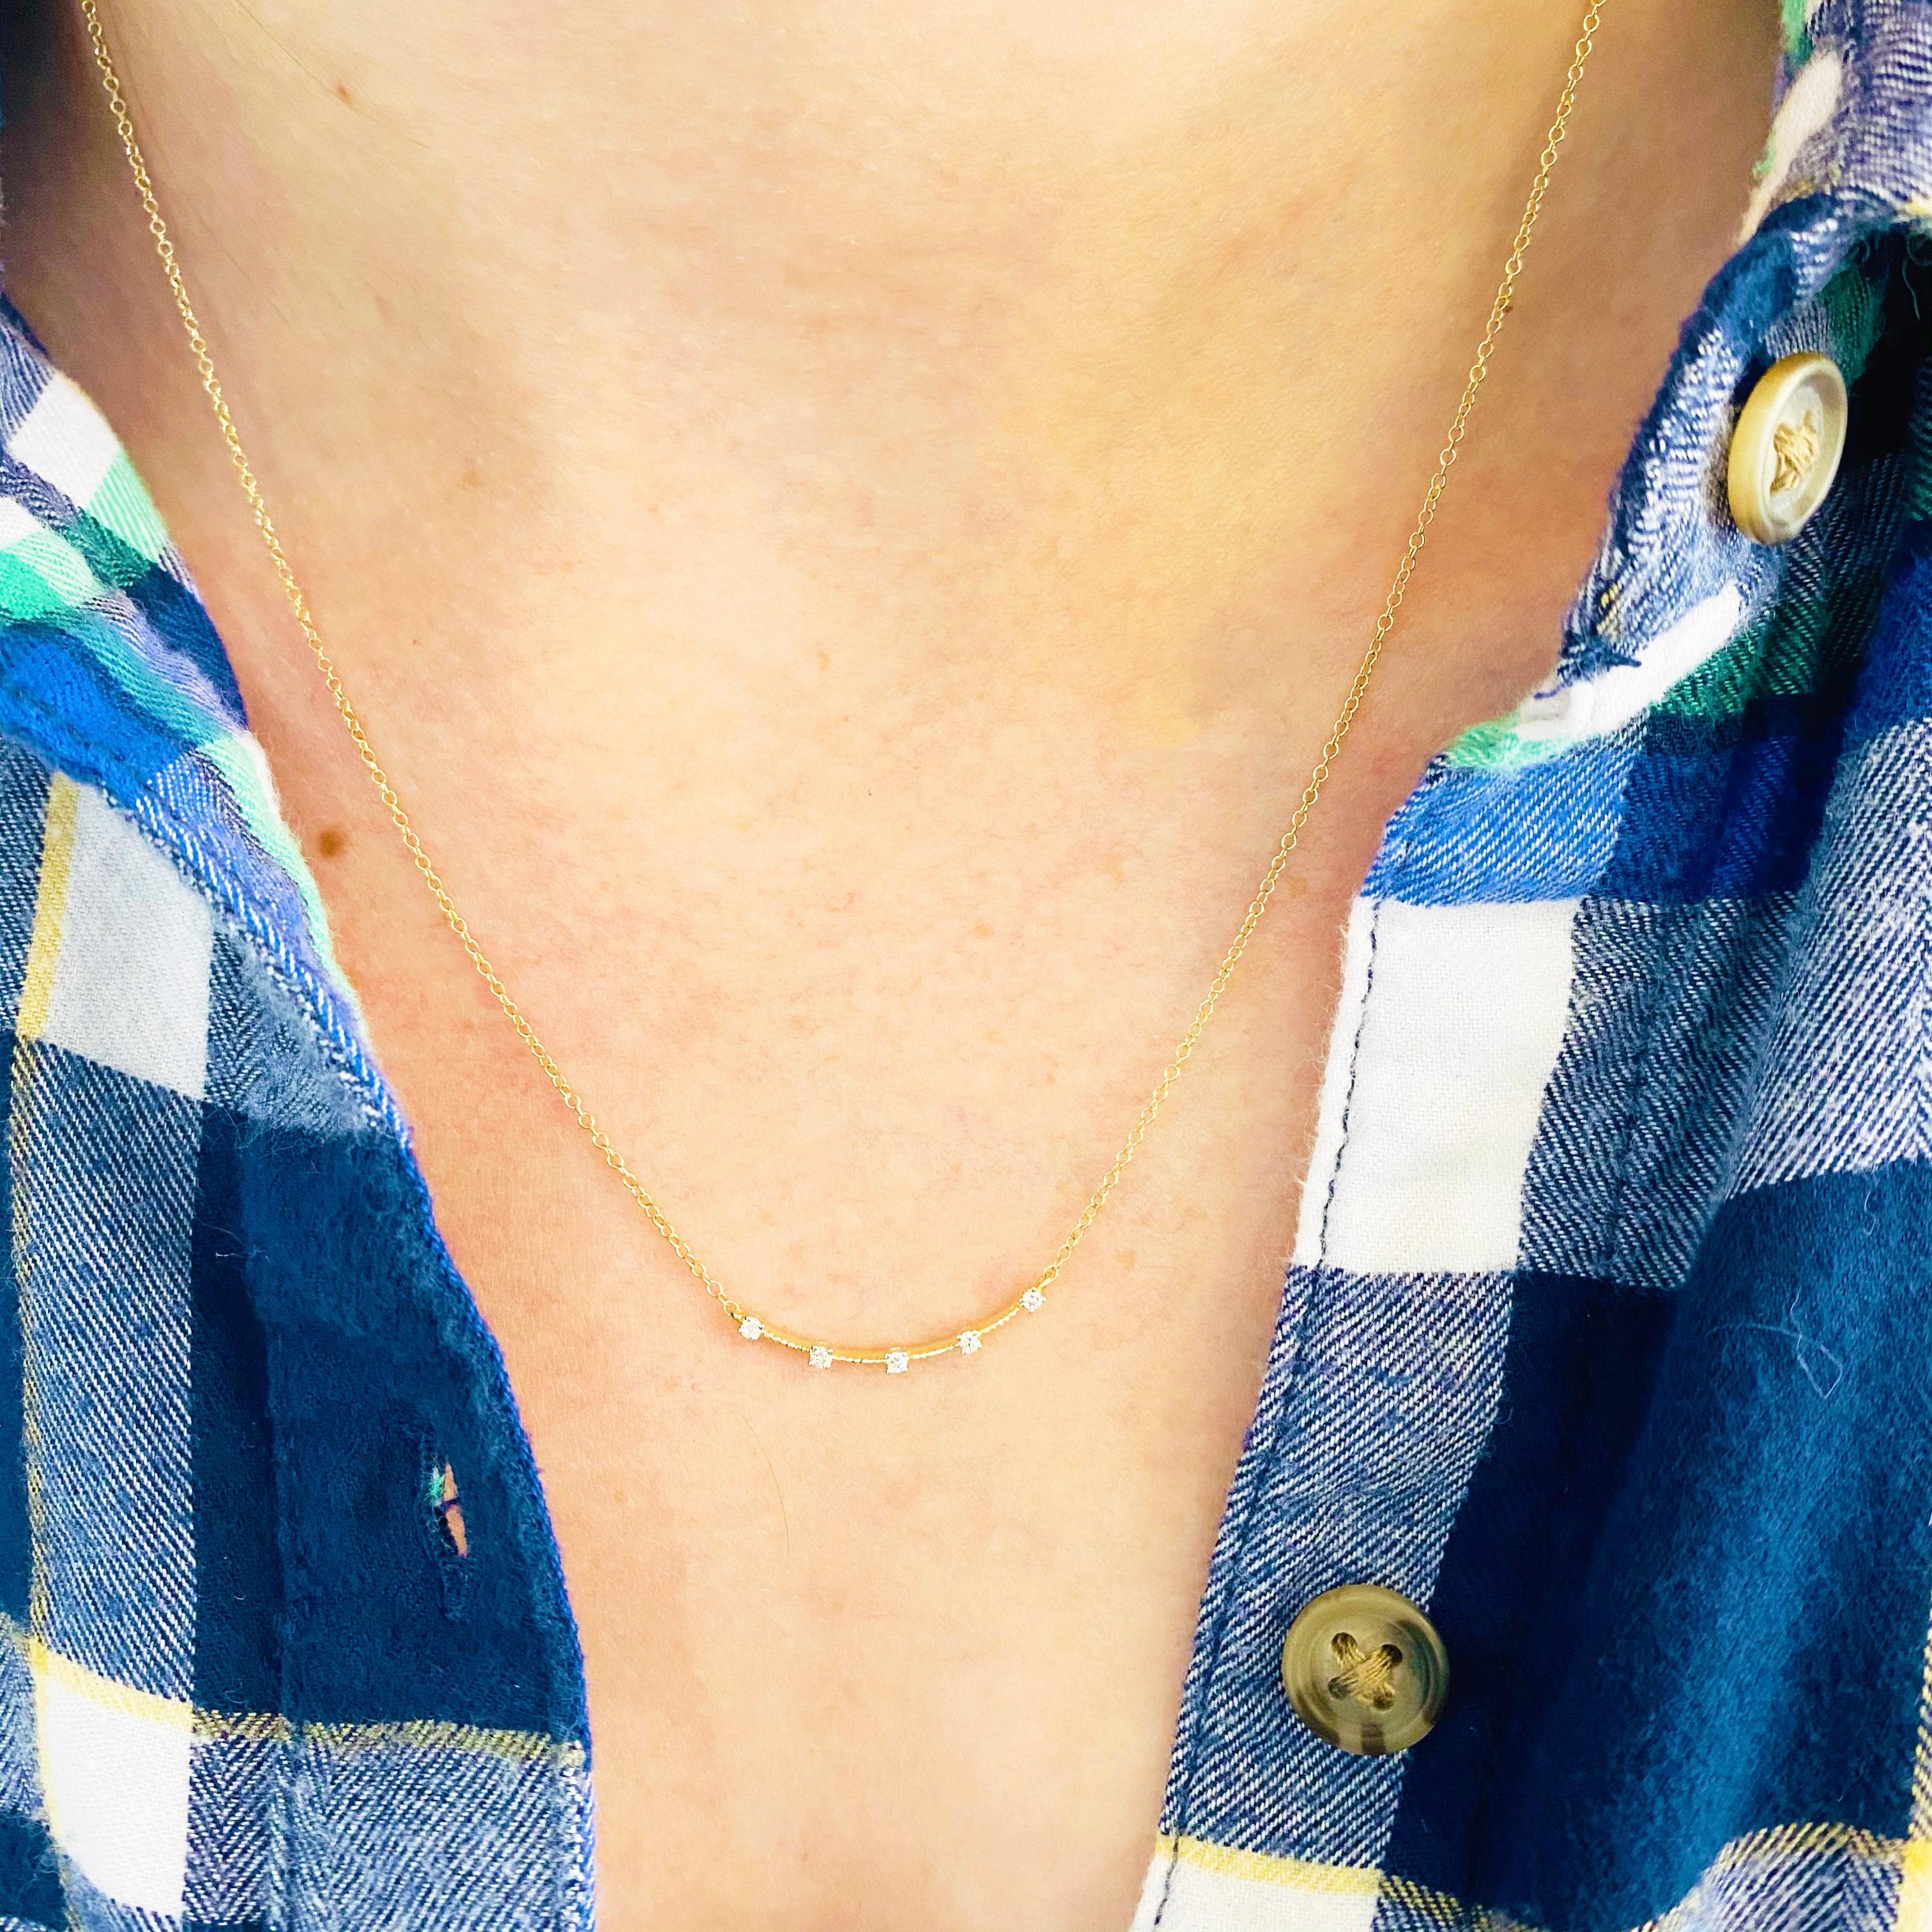 This gorgeous 14k yellow gold curved bar pendant dripping with five brilliant diamonds is sure to put a smile on anyone's face! This necklace looks beautiful worn by itself and also looks wonderful in a necklace stack. This necklace would make a